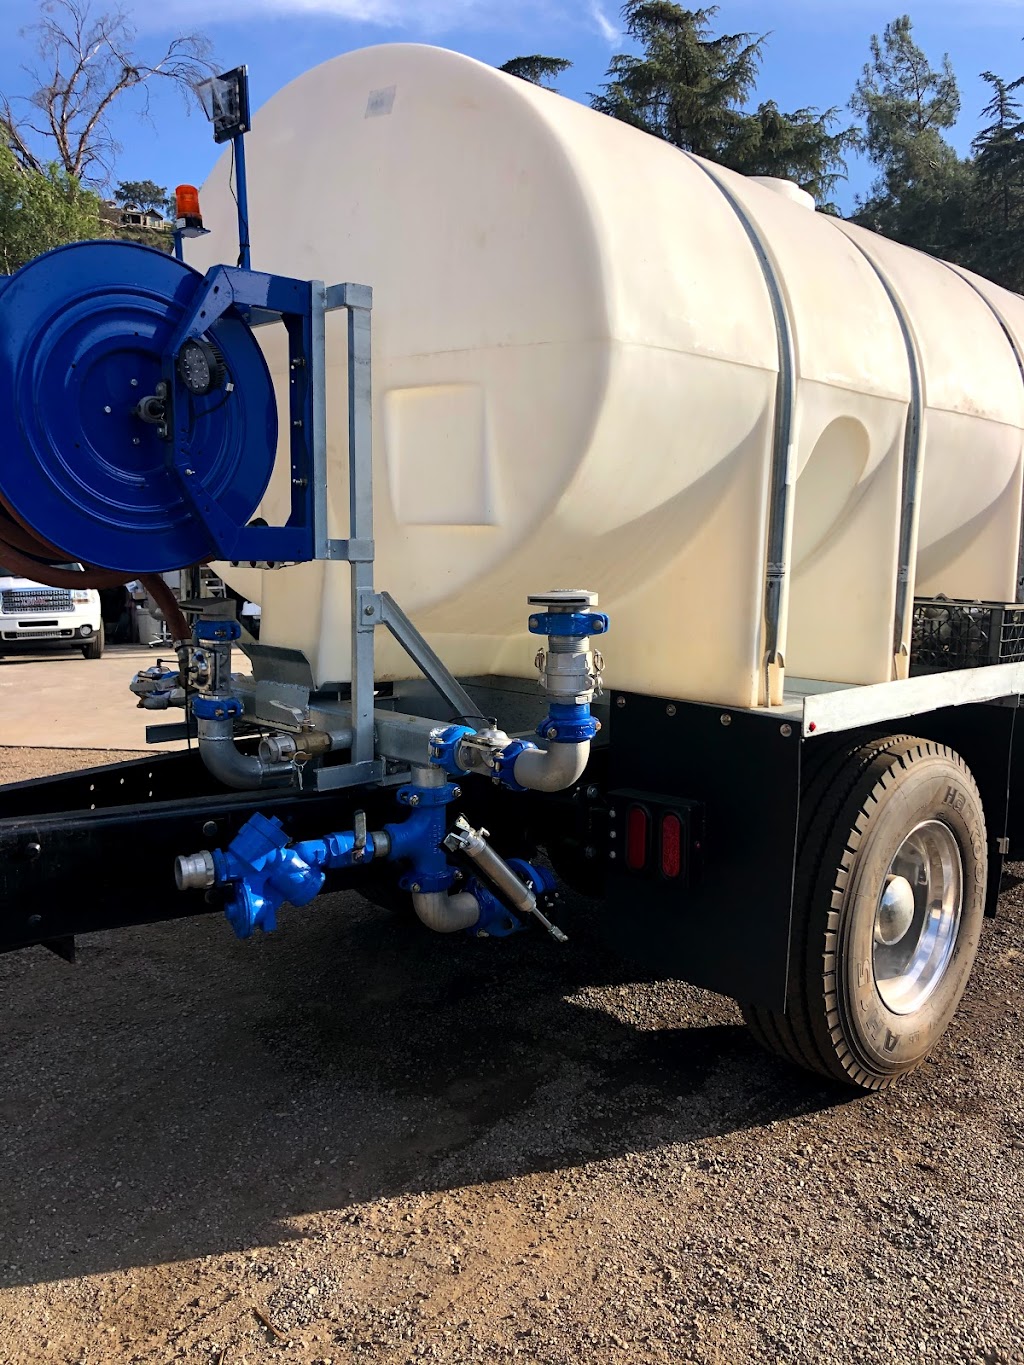 Brown Water Truck Service | 15384 Lawson Valley Rd, Jamul, CA 91935, USA | Phone: (619) 742-5711